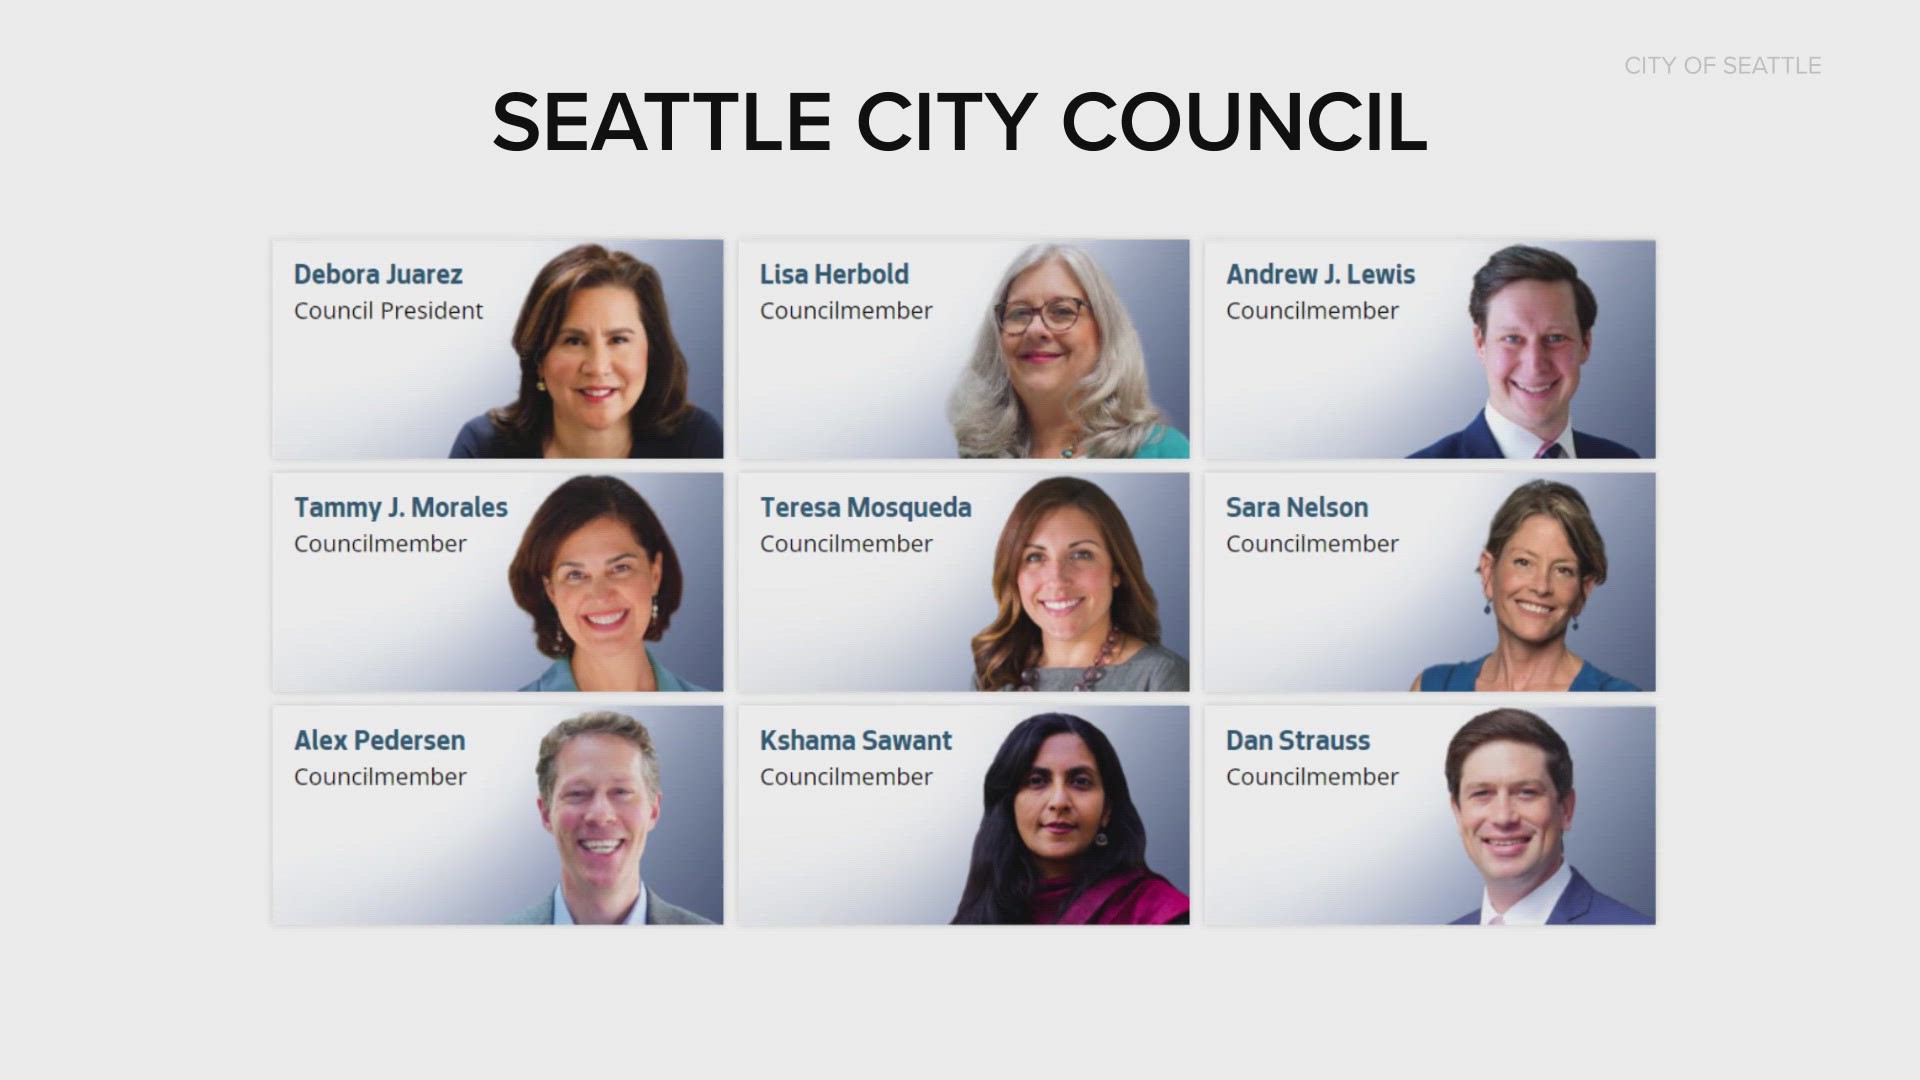 More than 40 candidates filed to run for the seven Seattle City Council district seats. Of the seven seats, only three current councilmembers are seeking reelection.